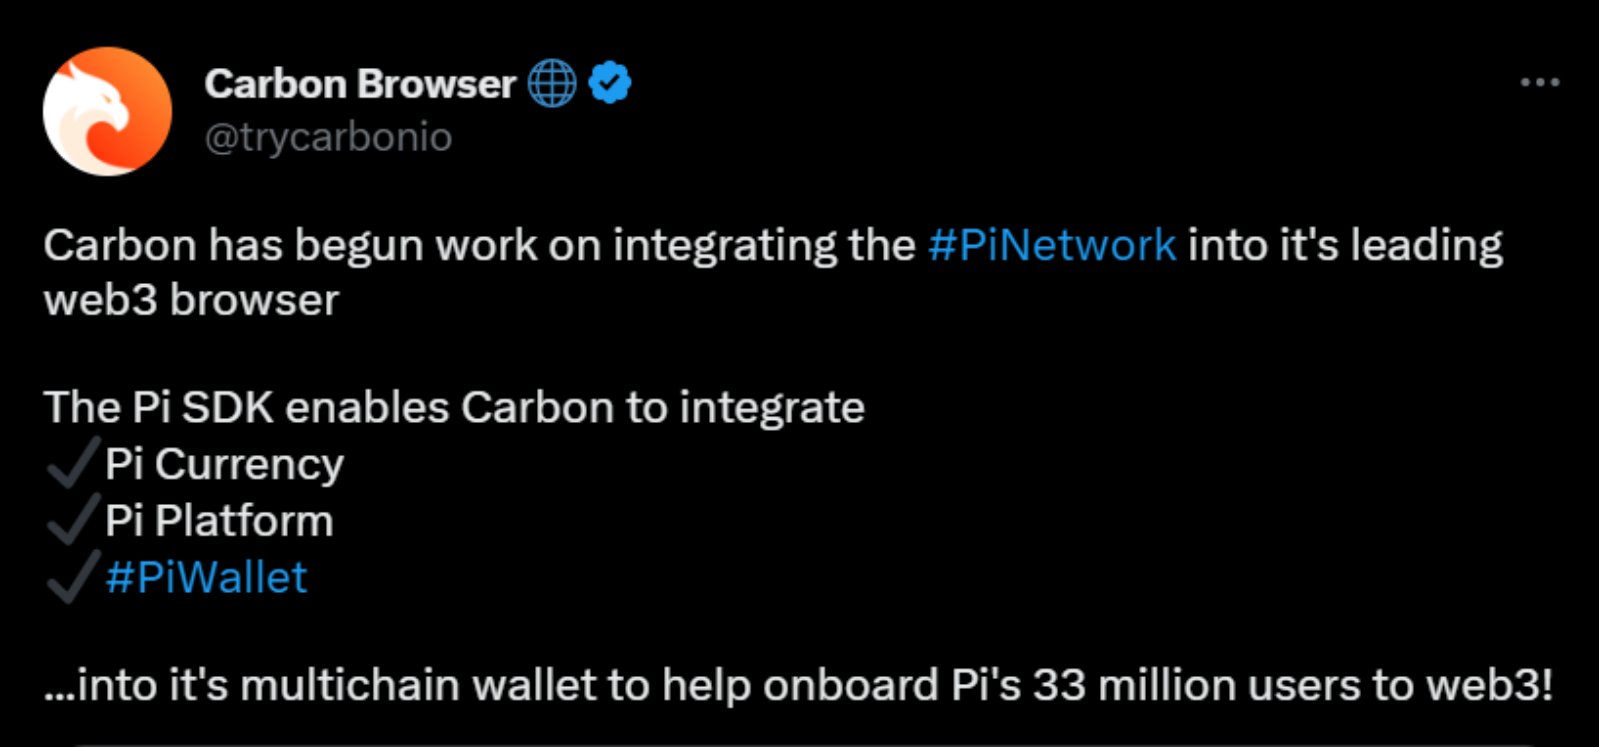 Carbon browser is working to integrate Pi Network.